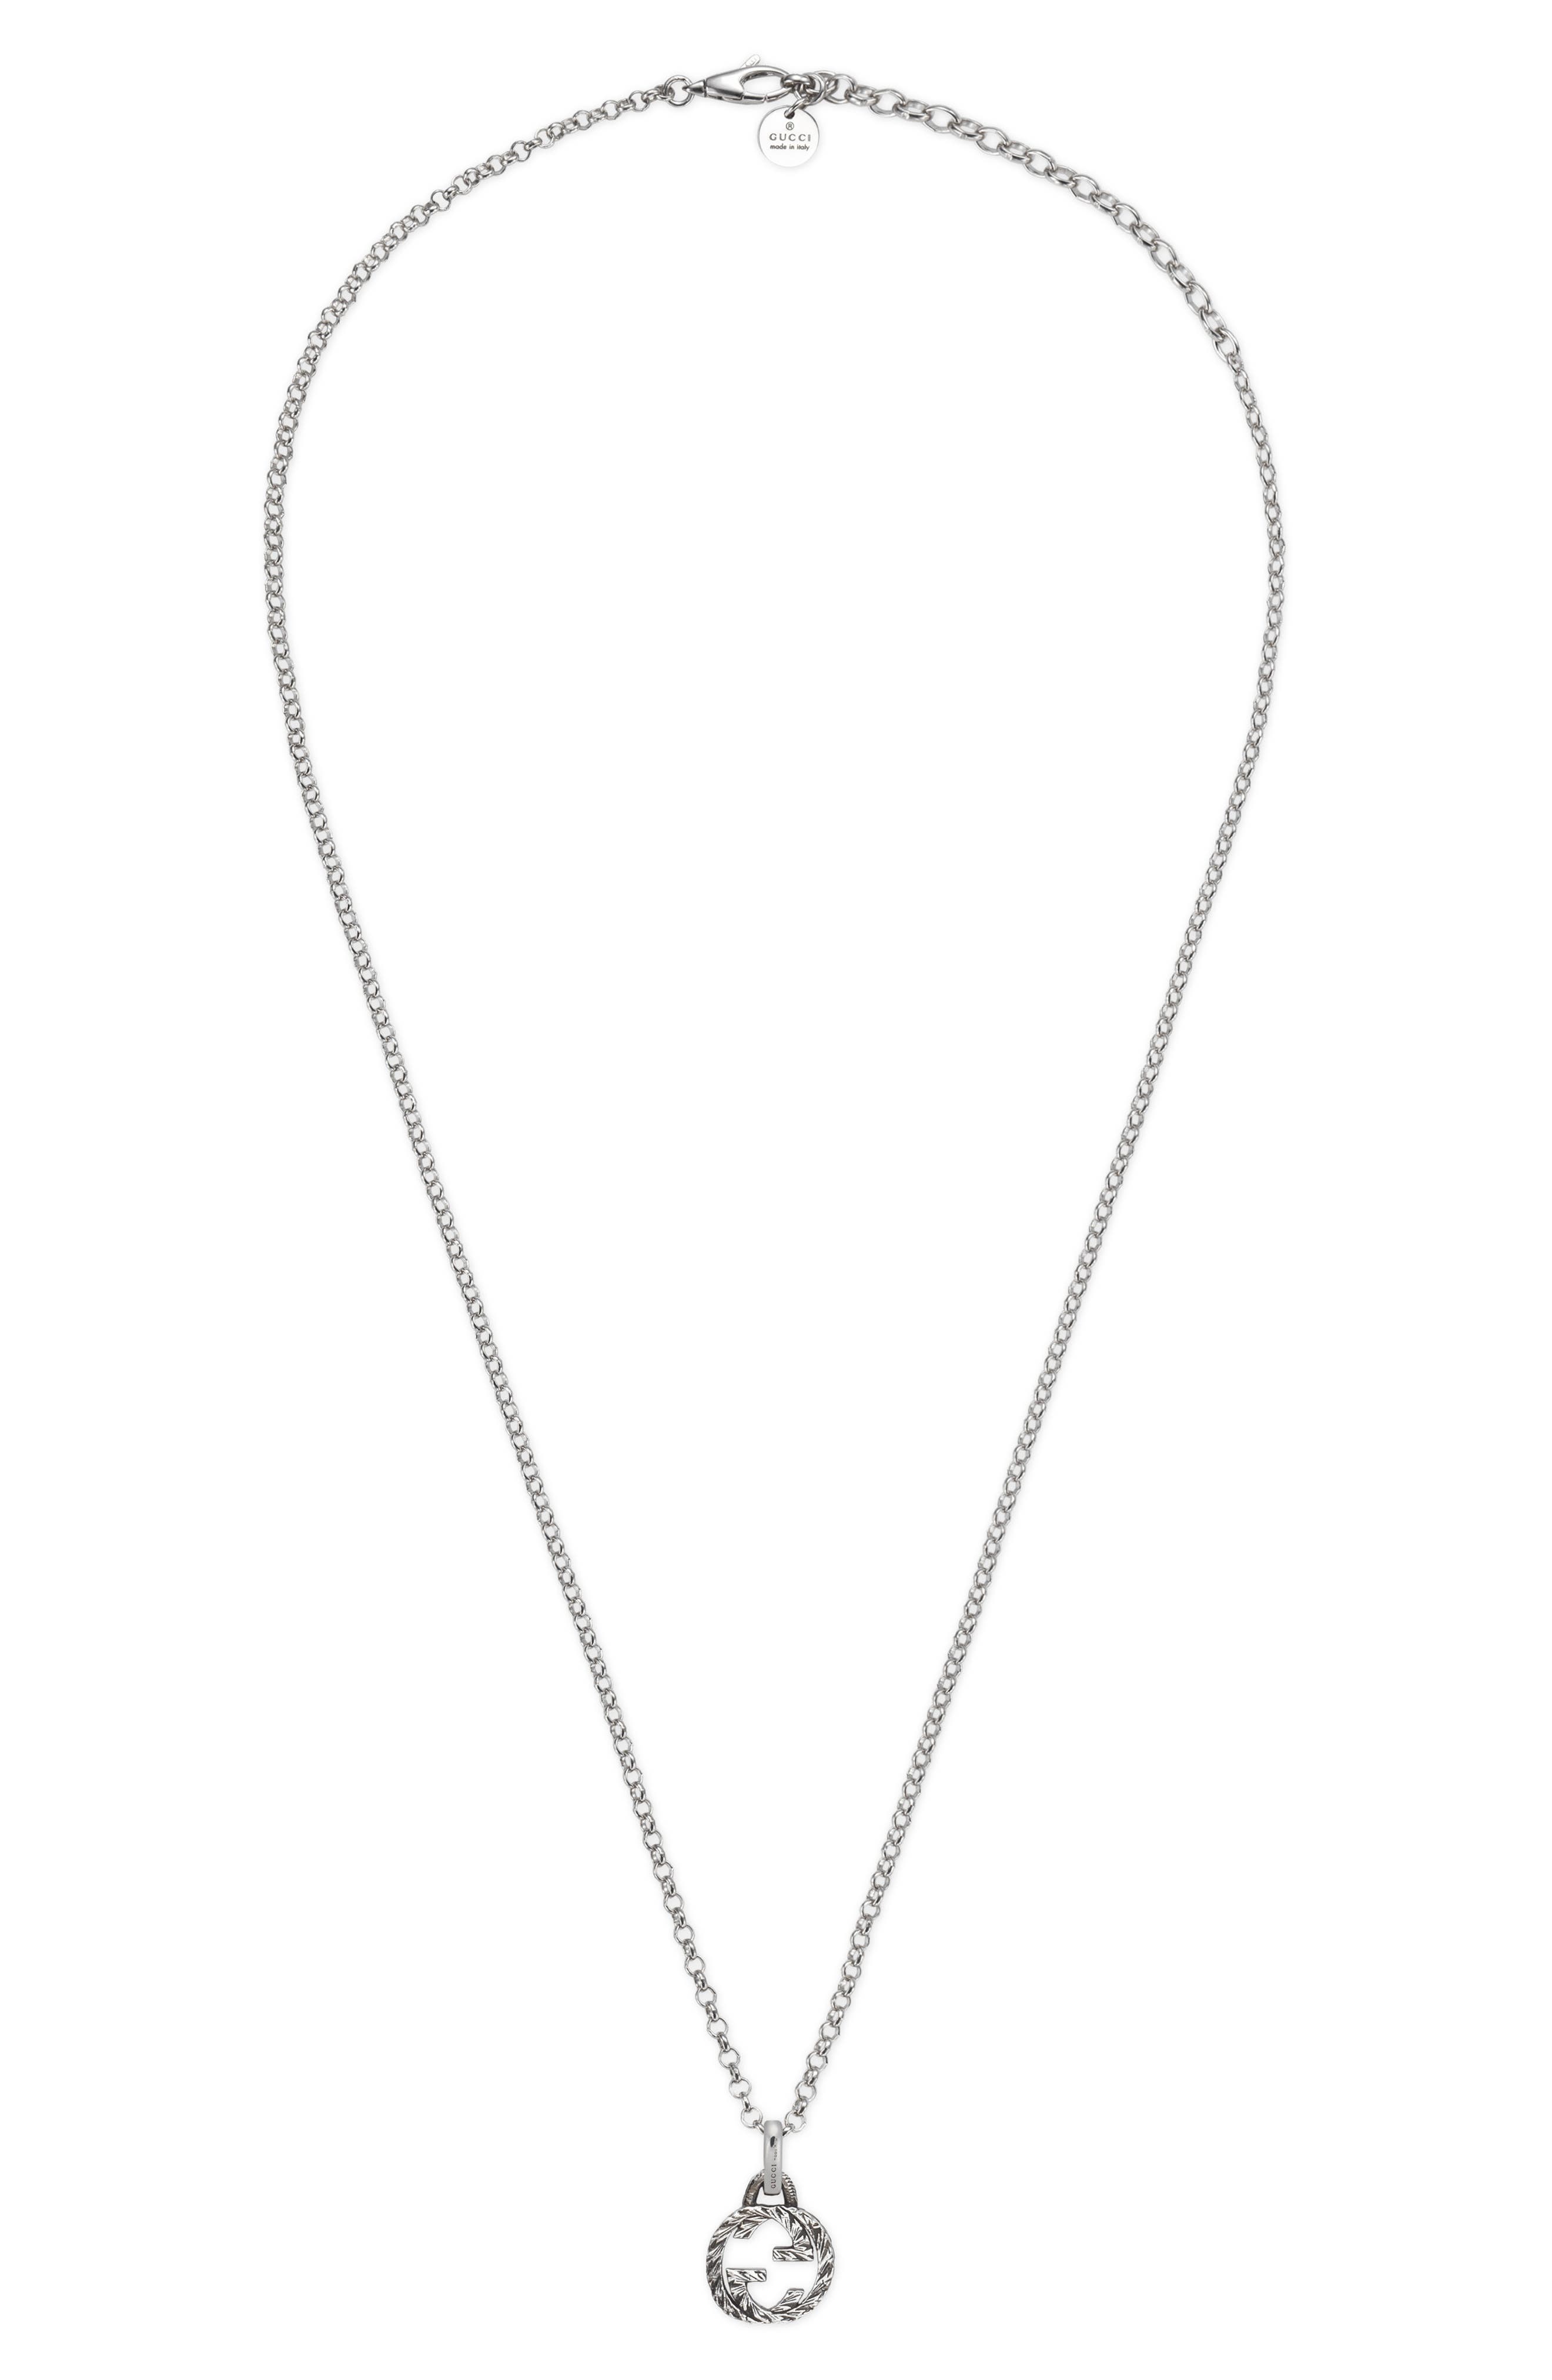 Gucci Interlocking-G Pendant Necklace in Sterling Silver at Nordstrom